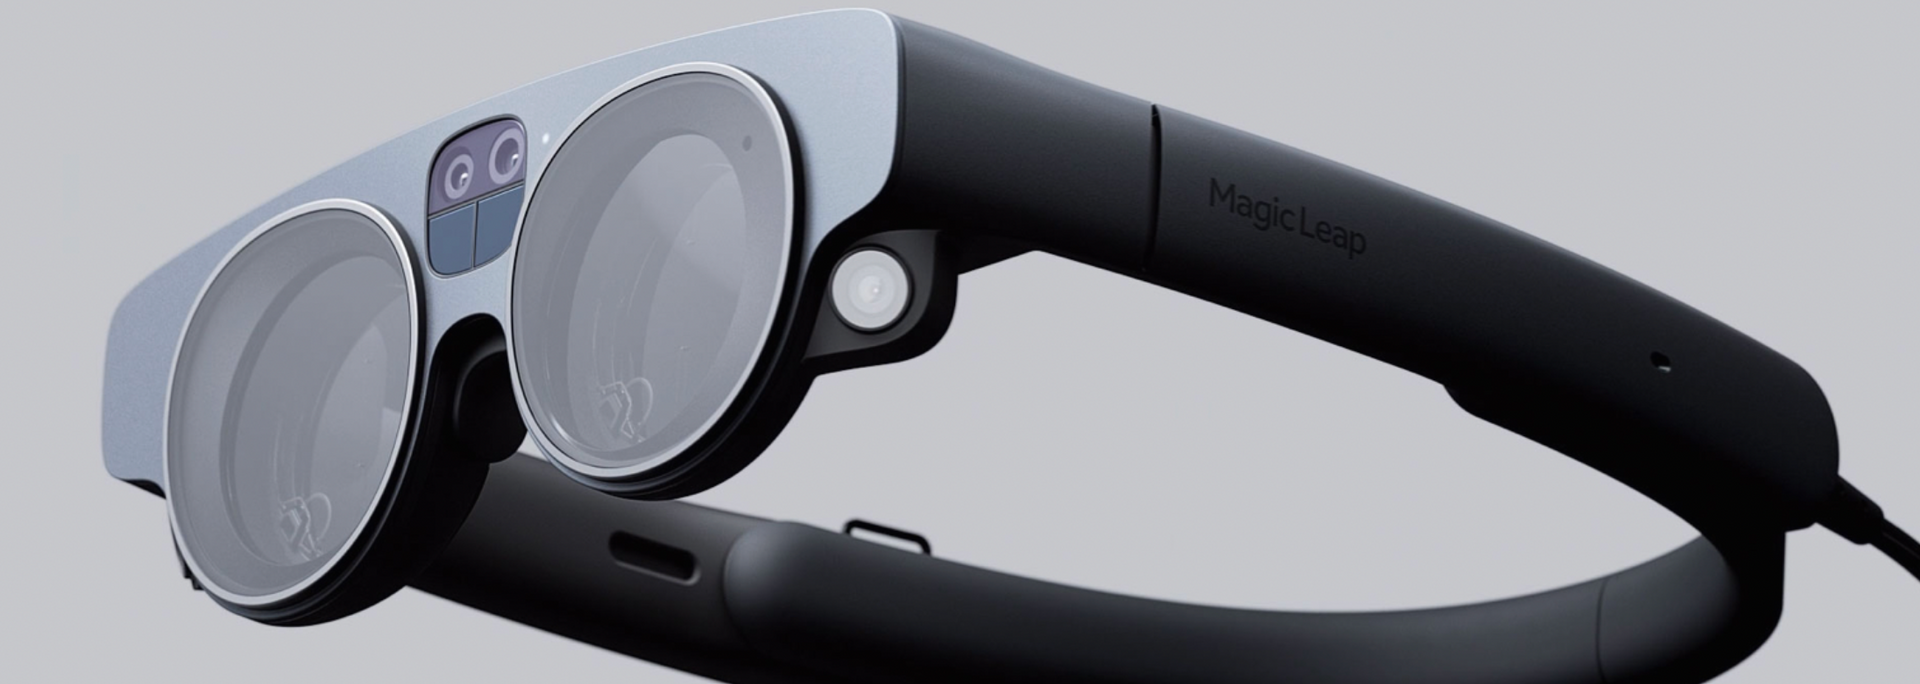 Picture of the Magic leap 2